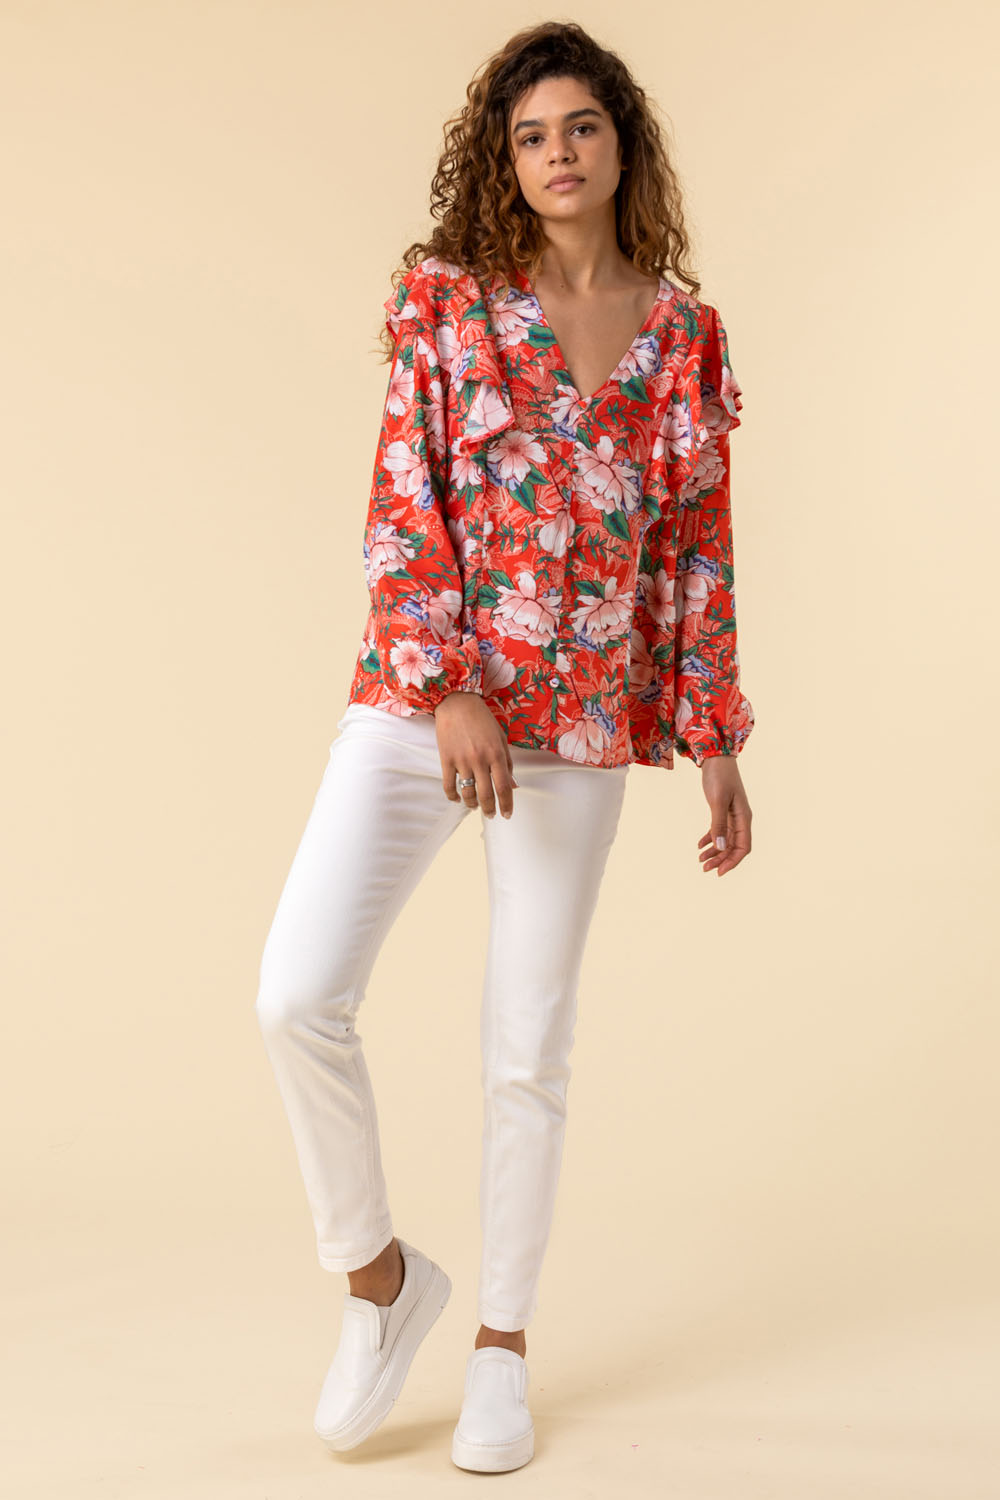 CORAL Floral Paisley Print Frill Sleeve Top, Image 3 of 5